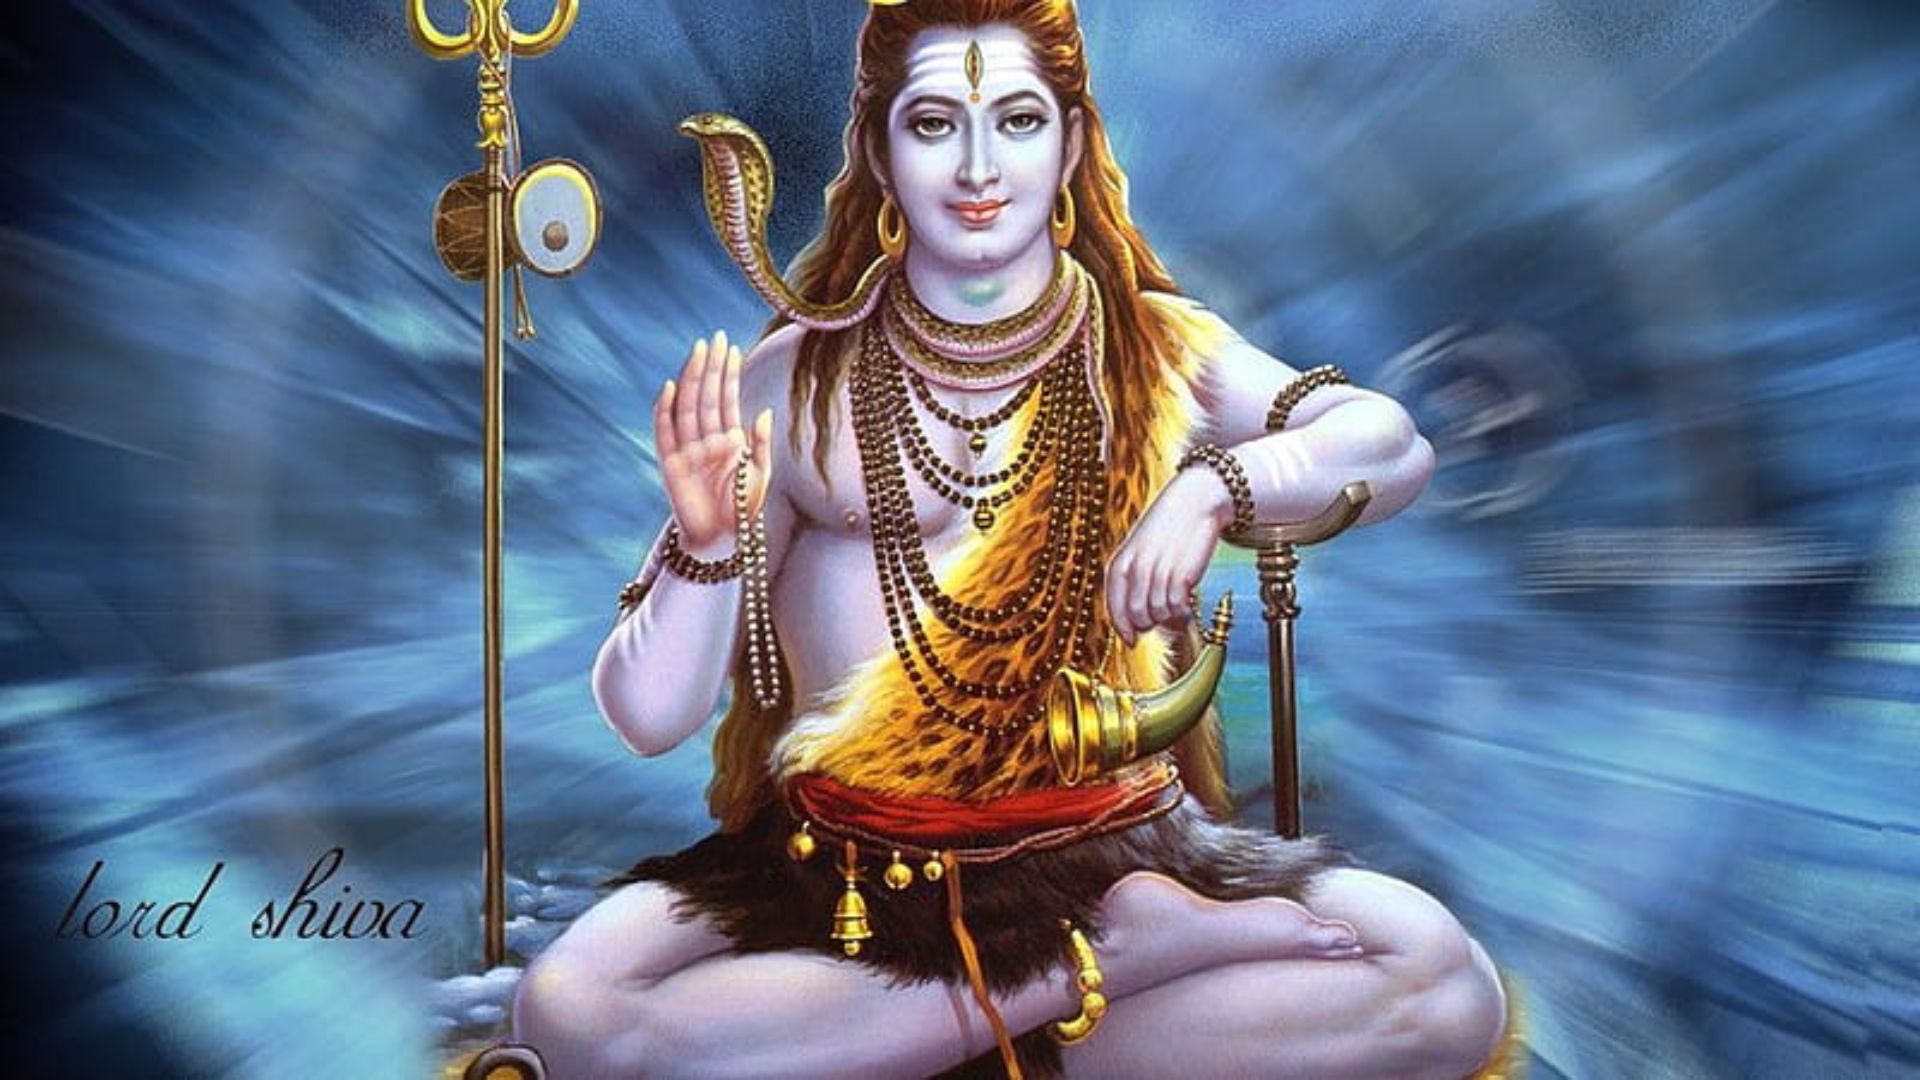 Lord shiva Background Images